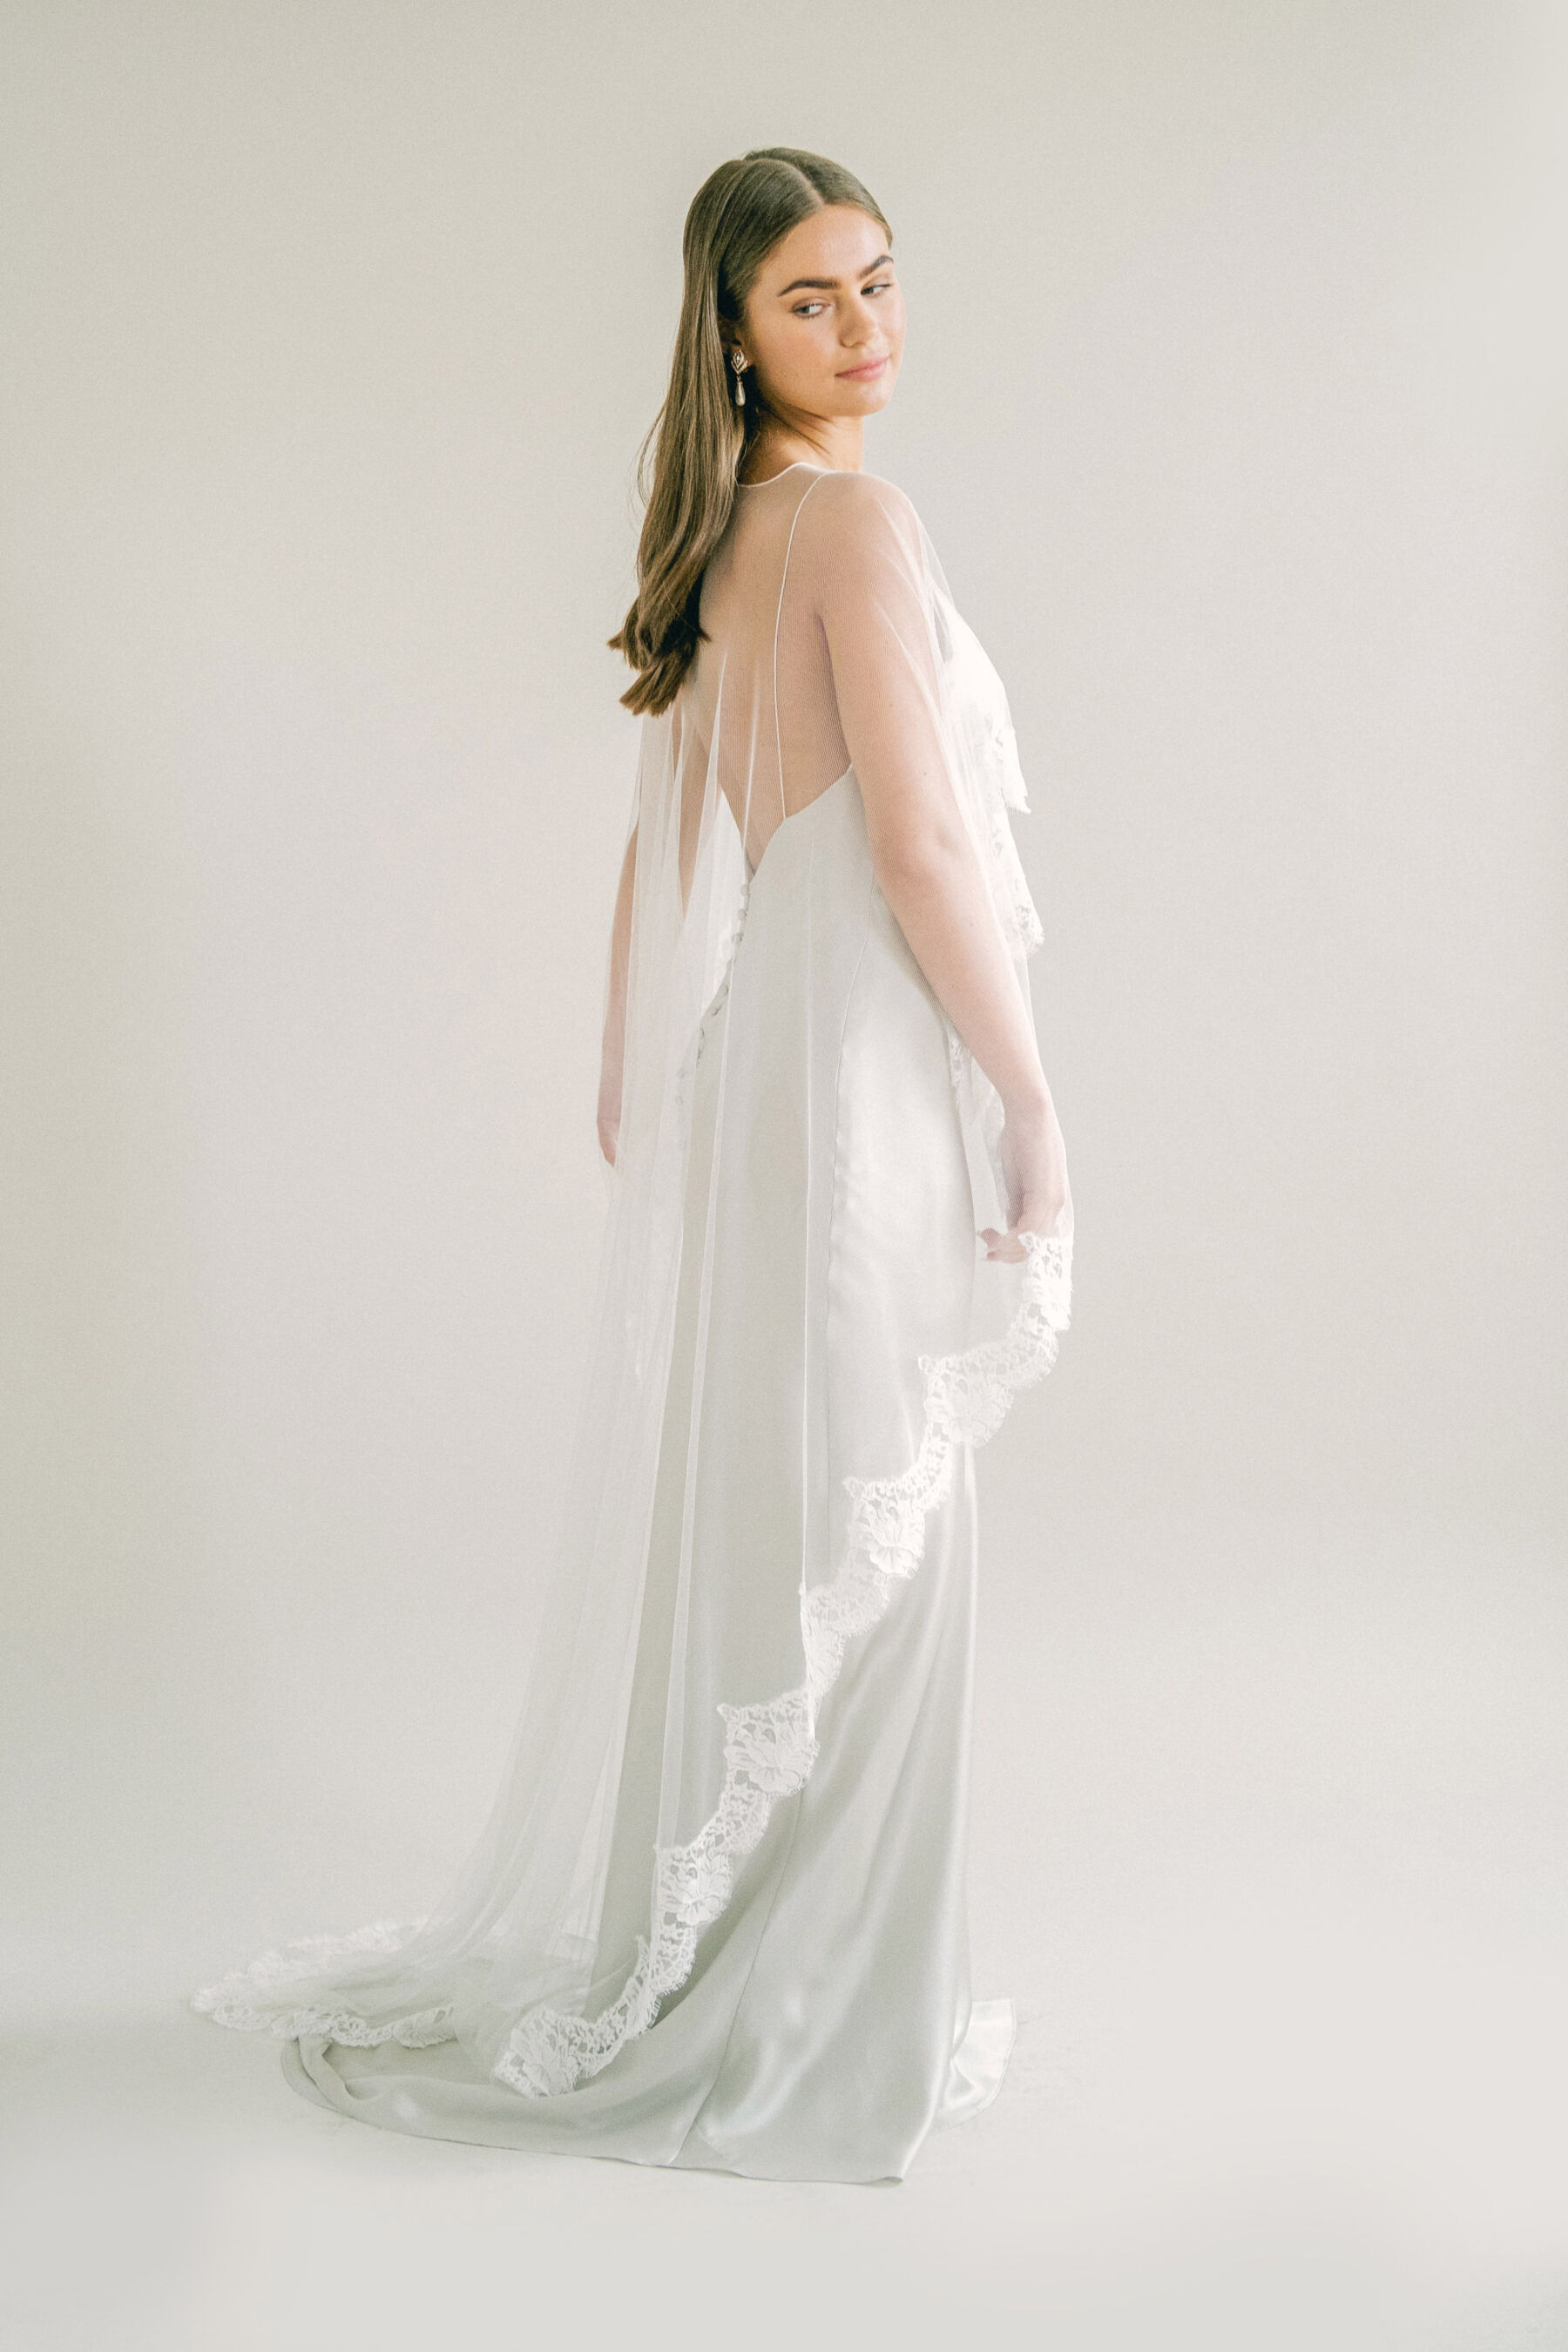 Bride wearing a Kate Beaumont slip dress with veil cape that is longer at the back.